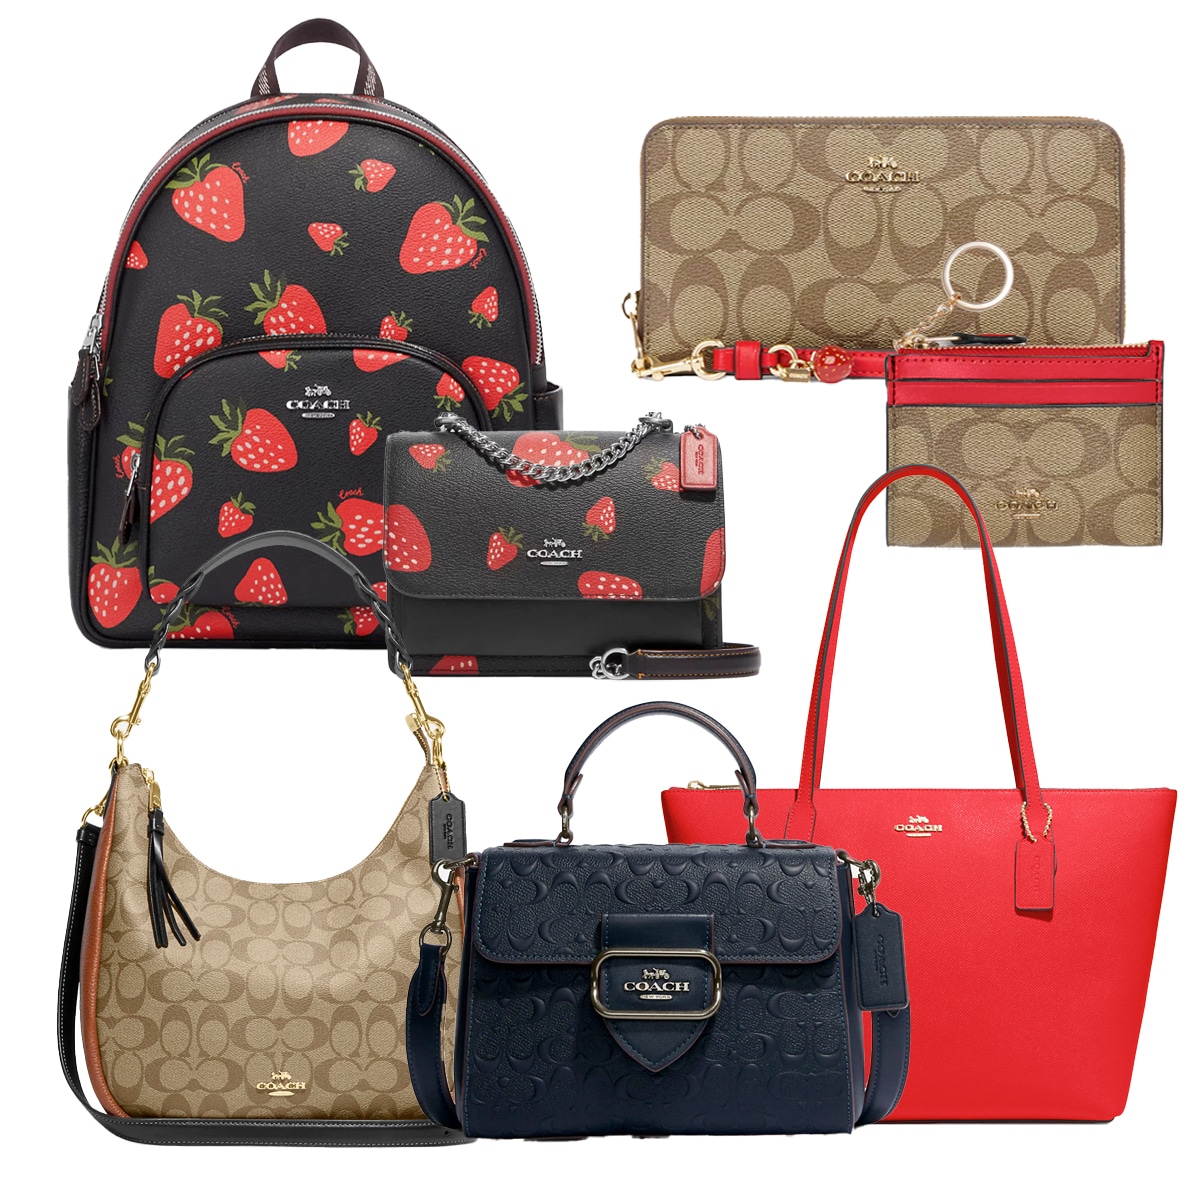 Hurry to Coach Outlet's Limited-Time Sale for the Best 70% Off Deals - E!  Online